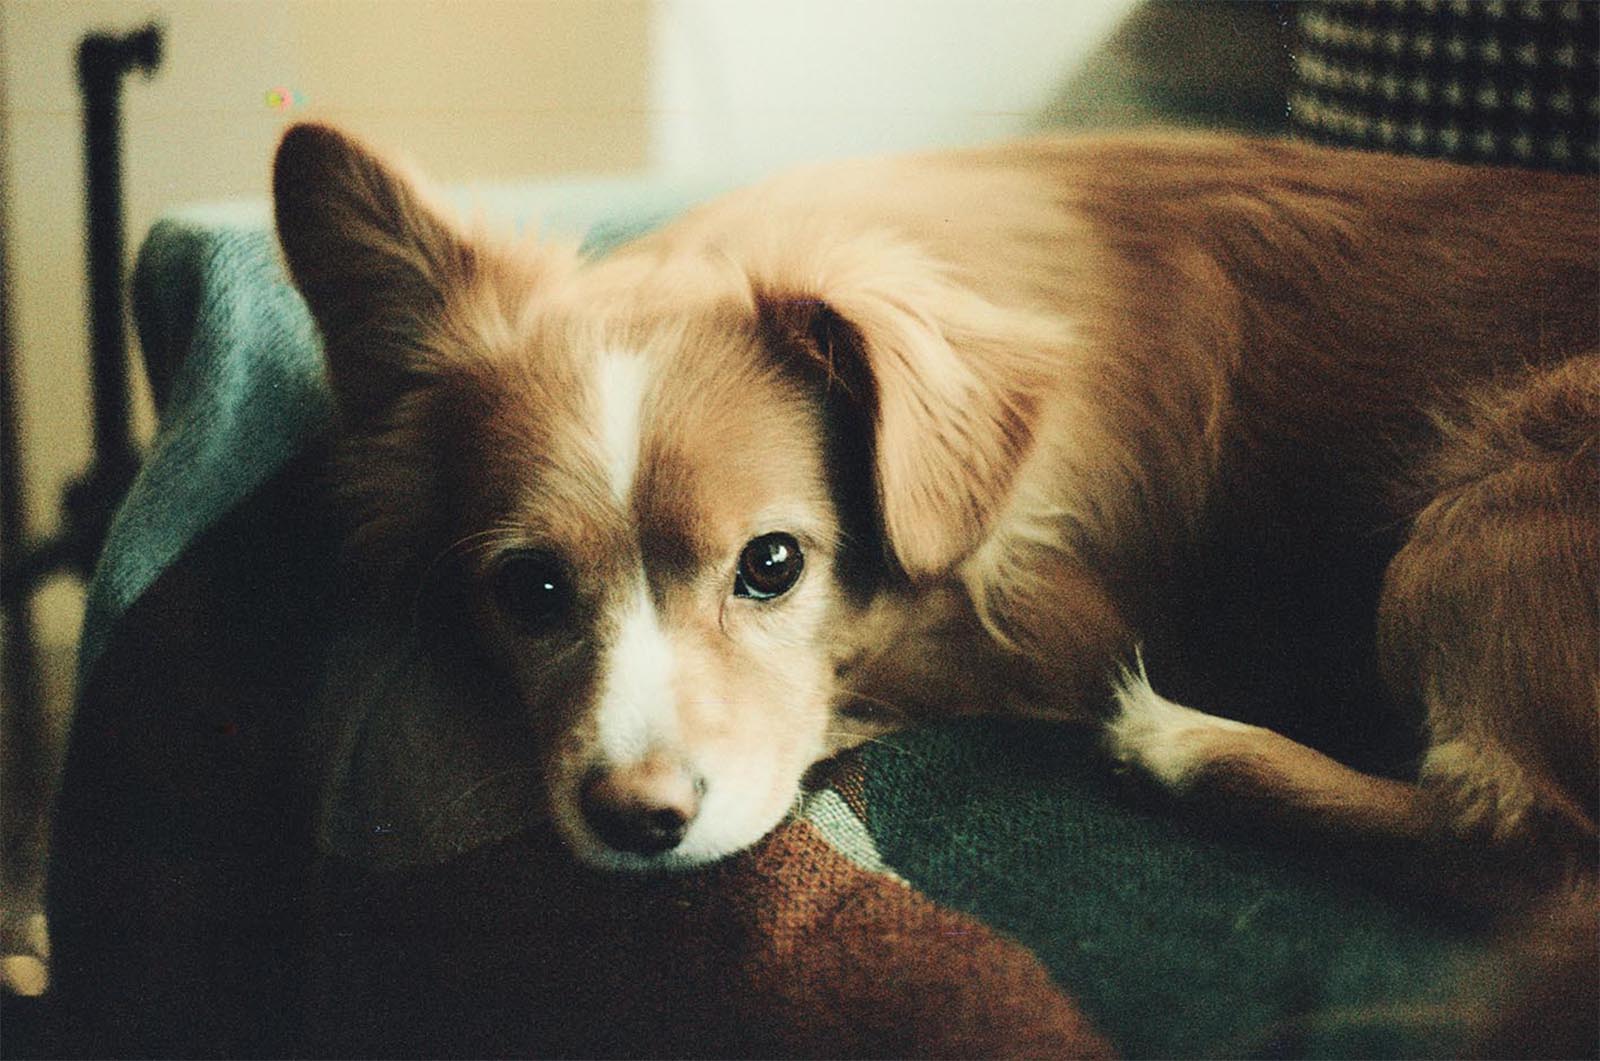 A brown and white dog with fluffy ears lying comfortably on a green and brown blanket, looking directly at the camera with a gentle gaze.